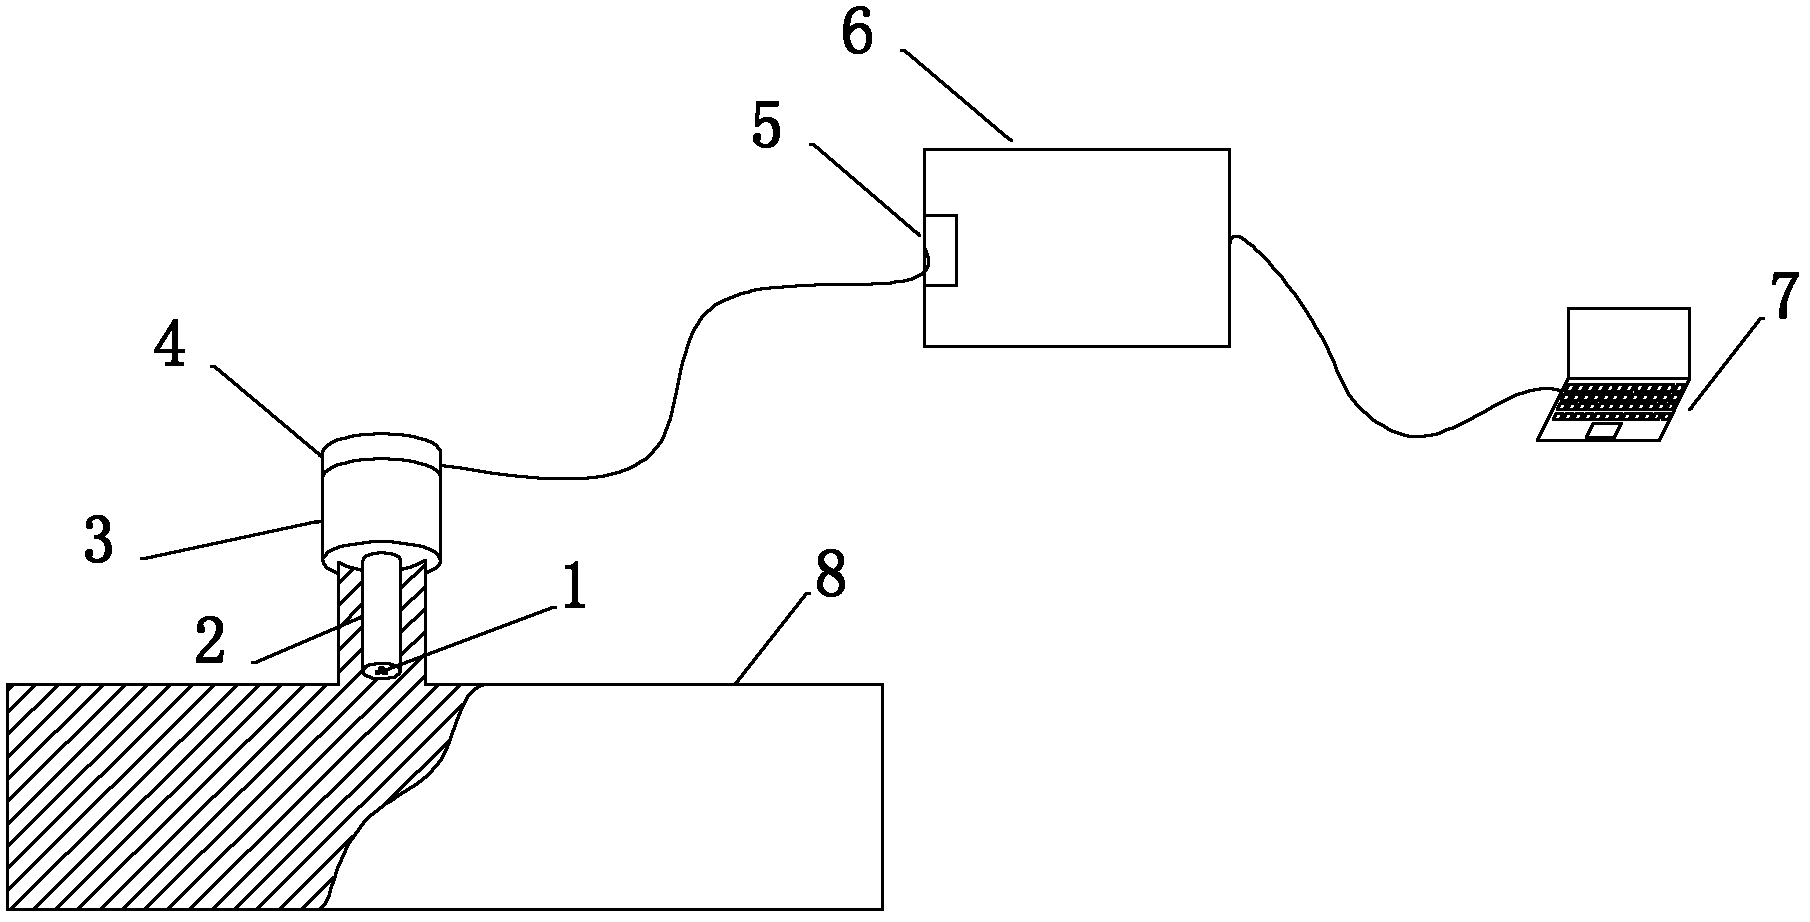 Online monitoring device for corrosion in pipeline